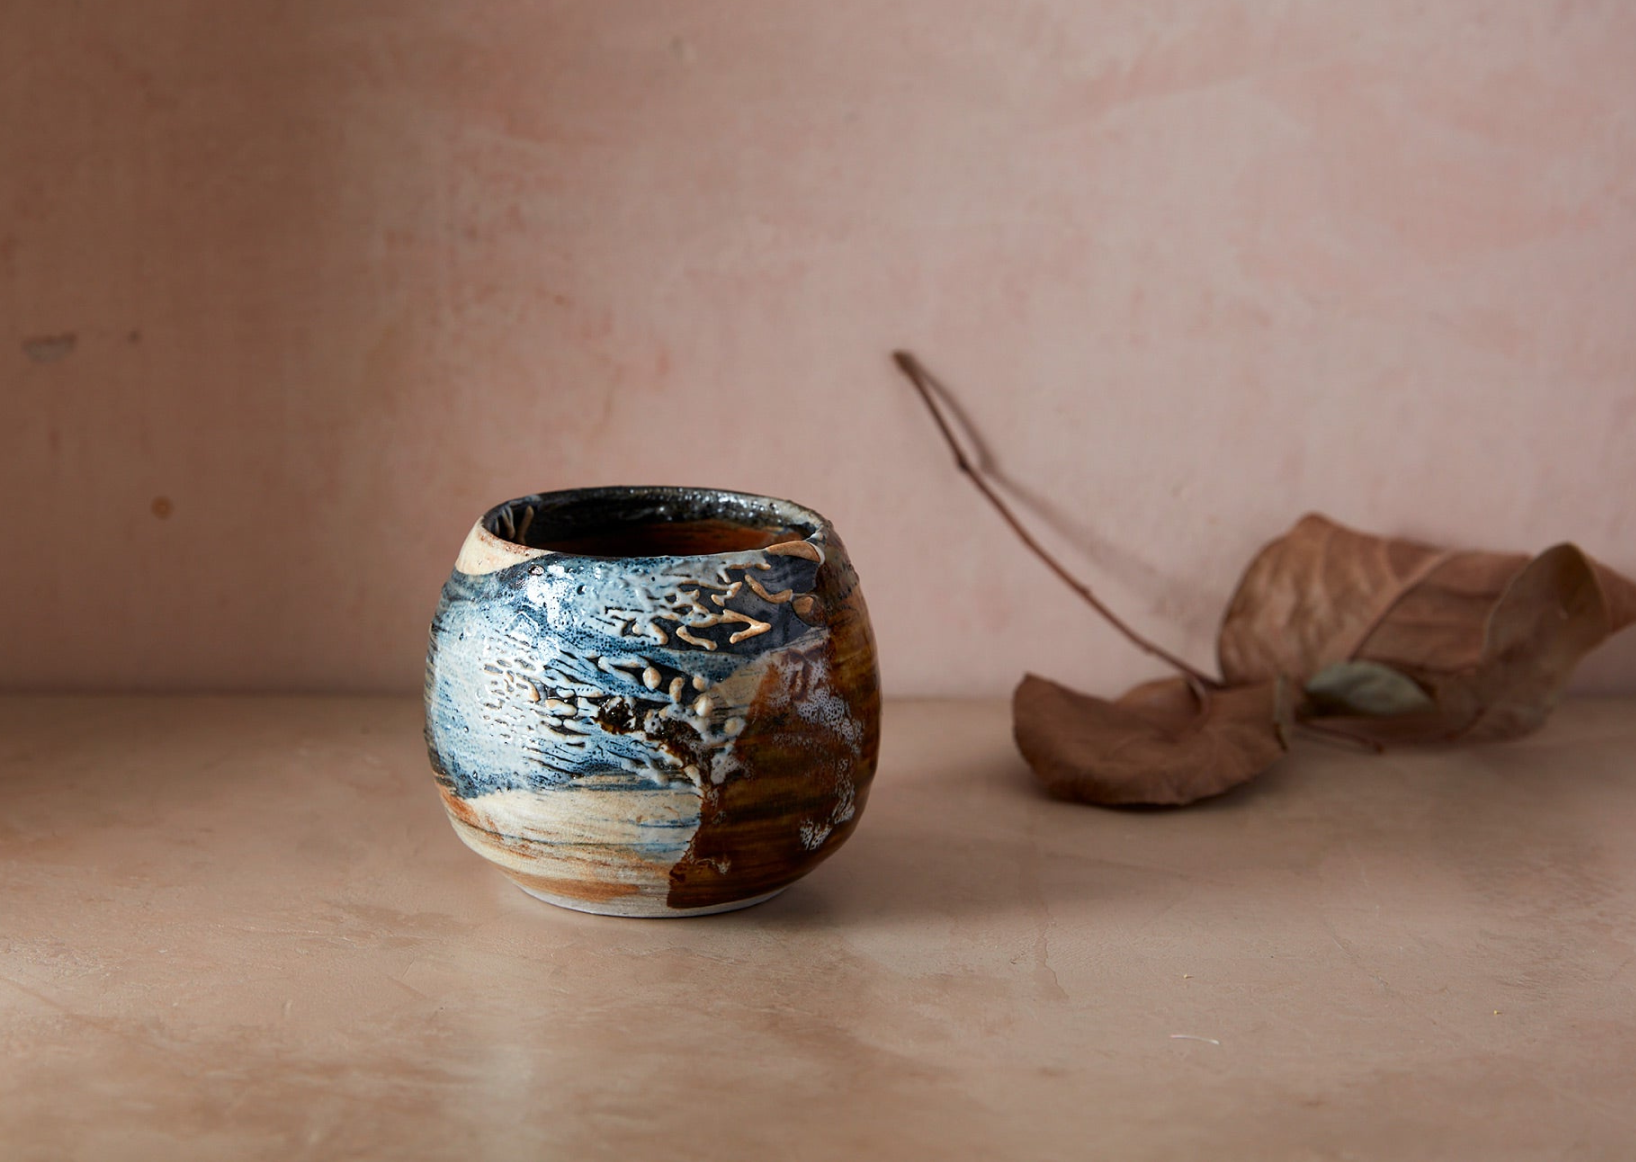 Seto Vase seen here is available exclusively through Bellocq